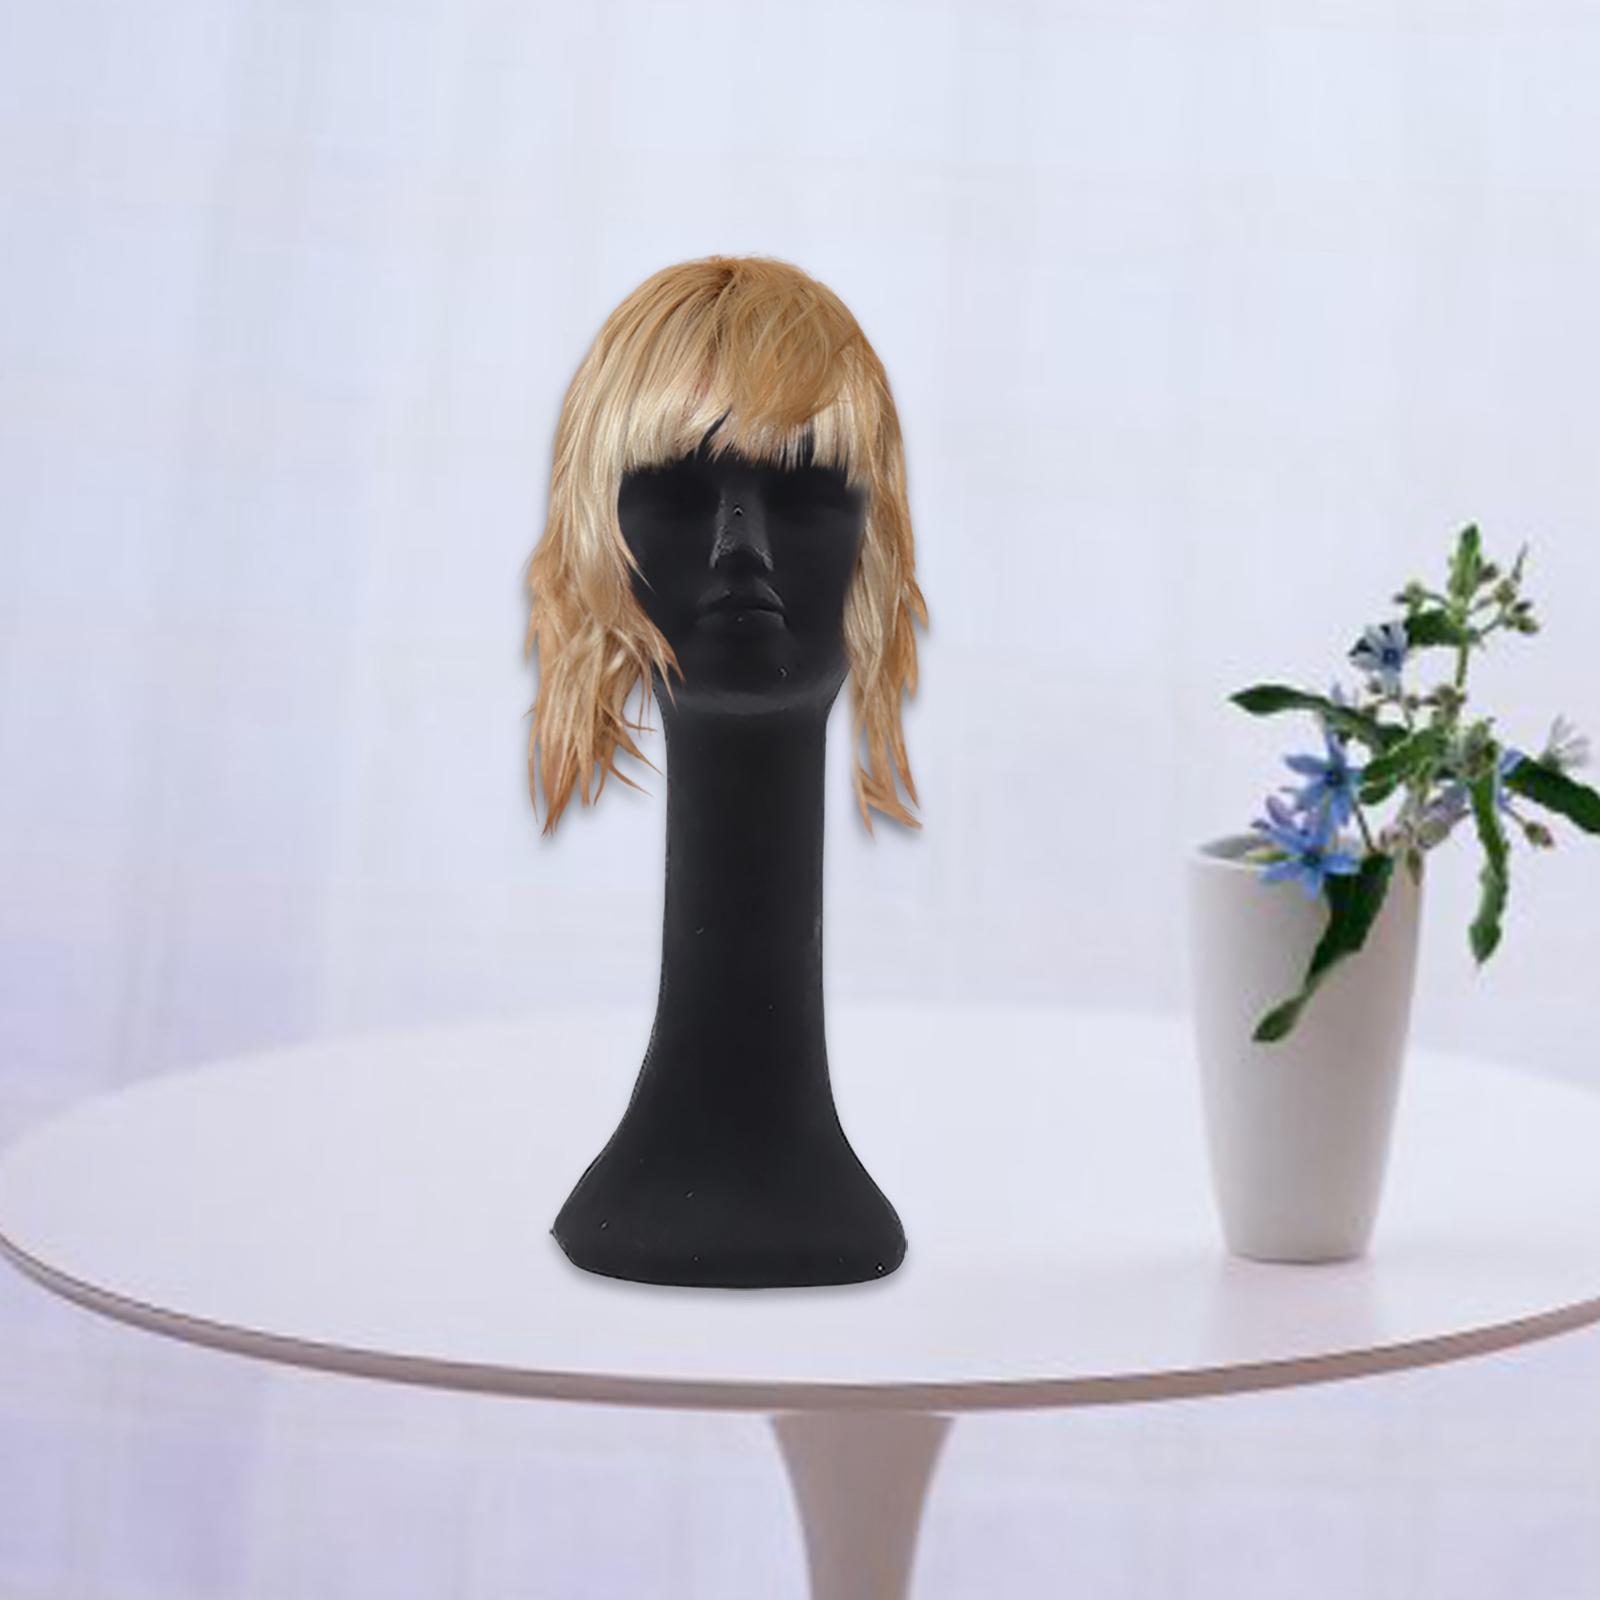 Women Wig Head Display Foam Head Model Stand Mannequin High Simulation DIY Photography Props